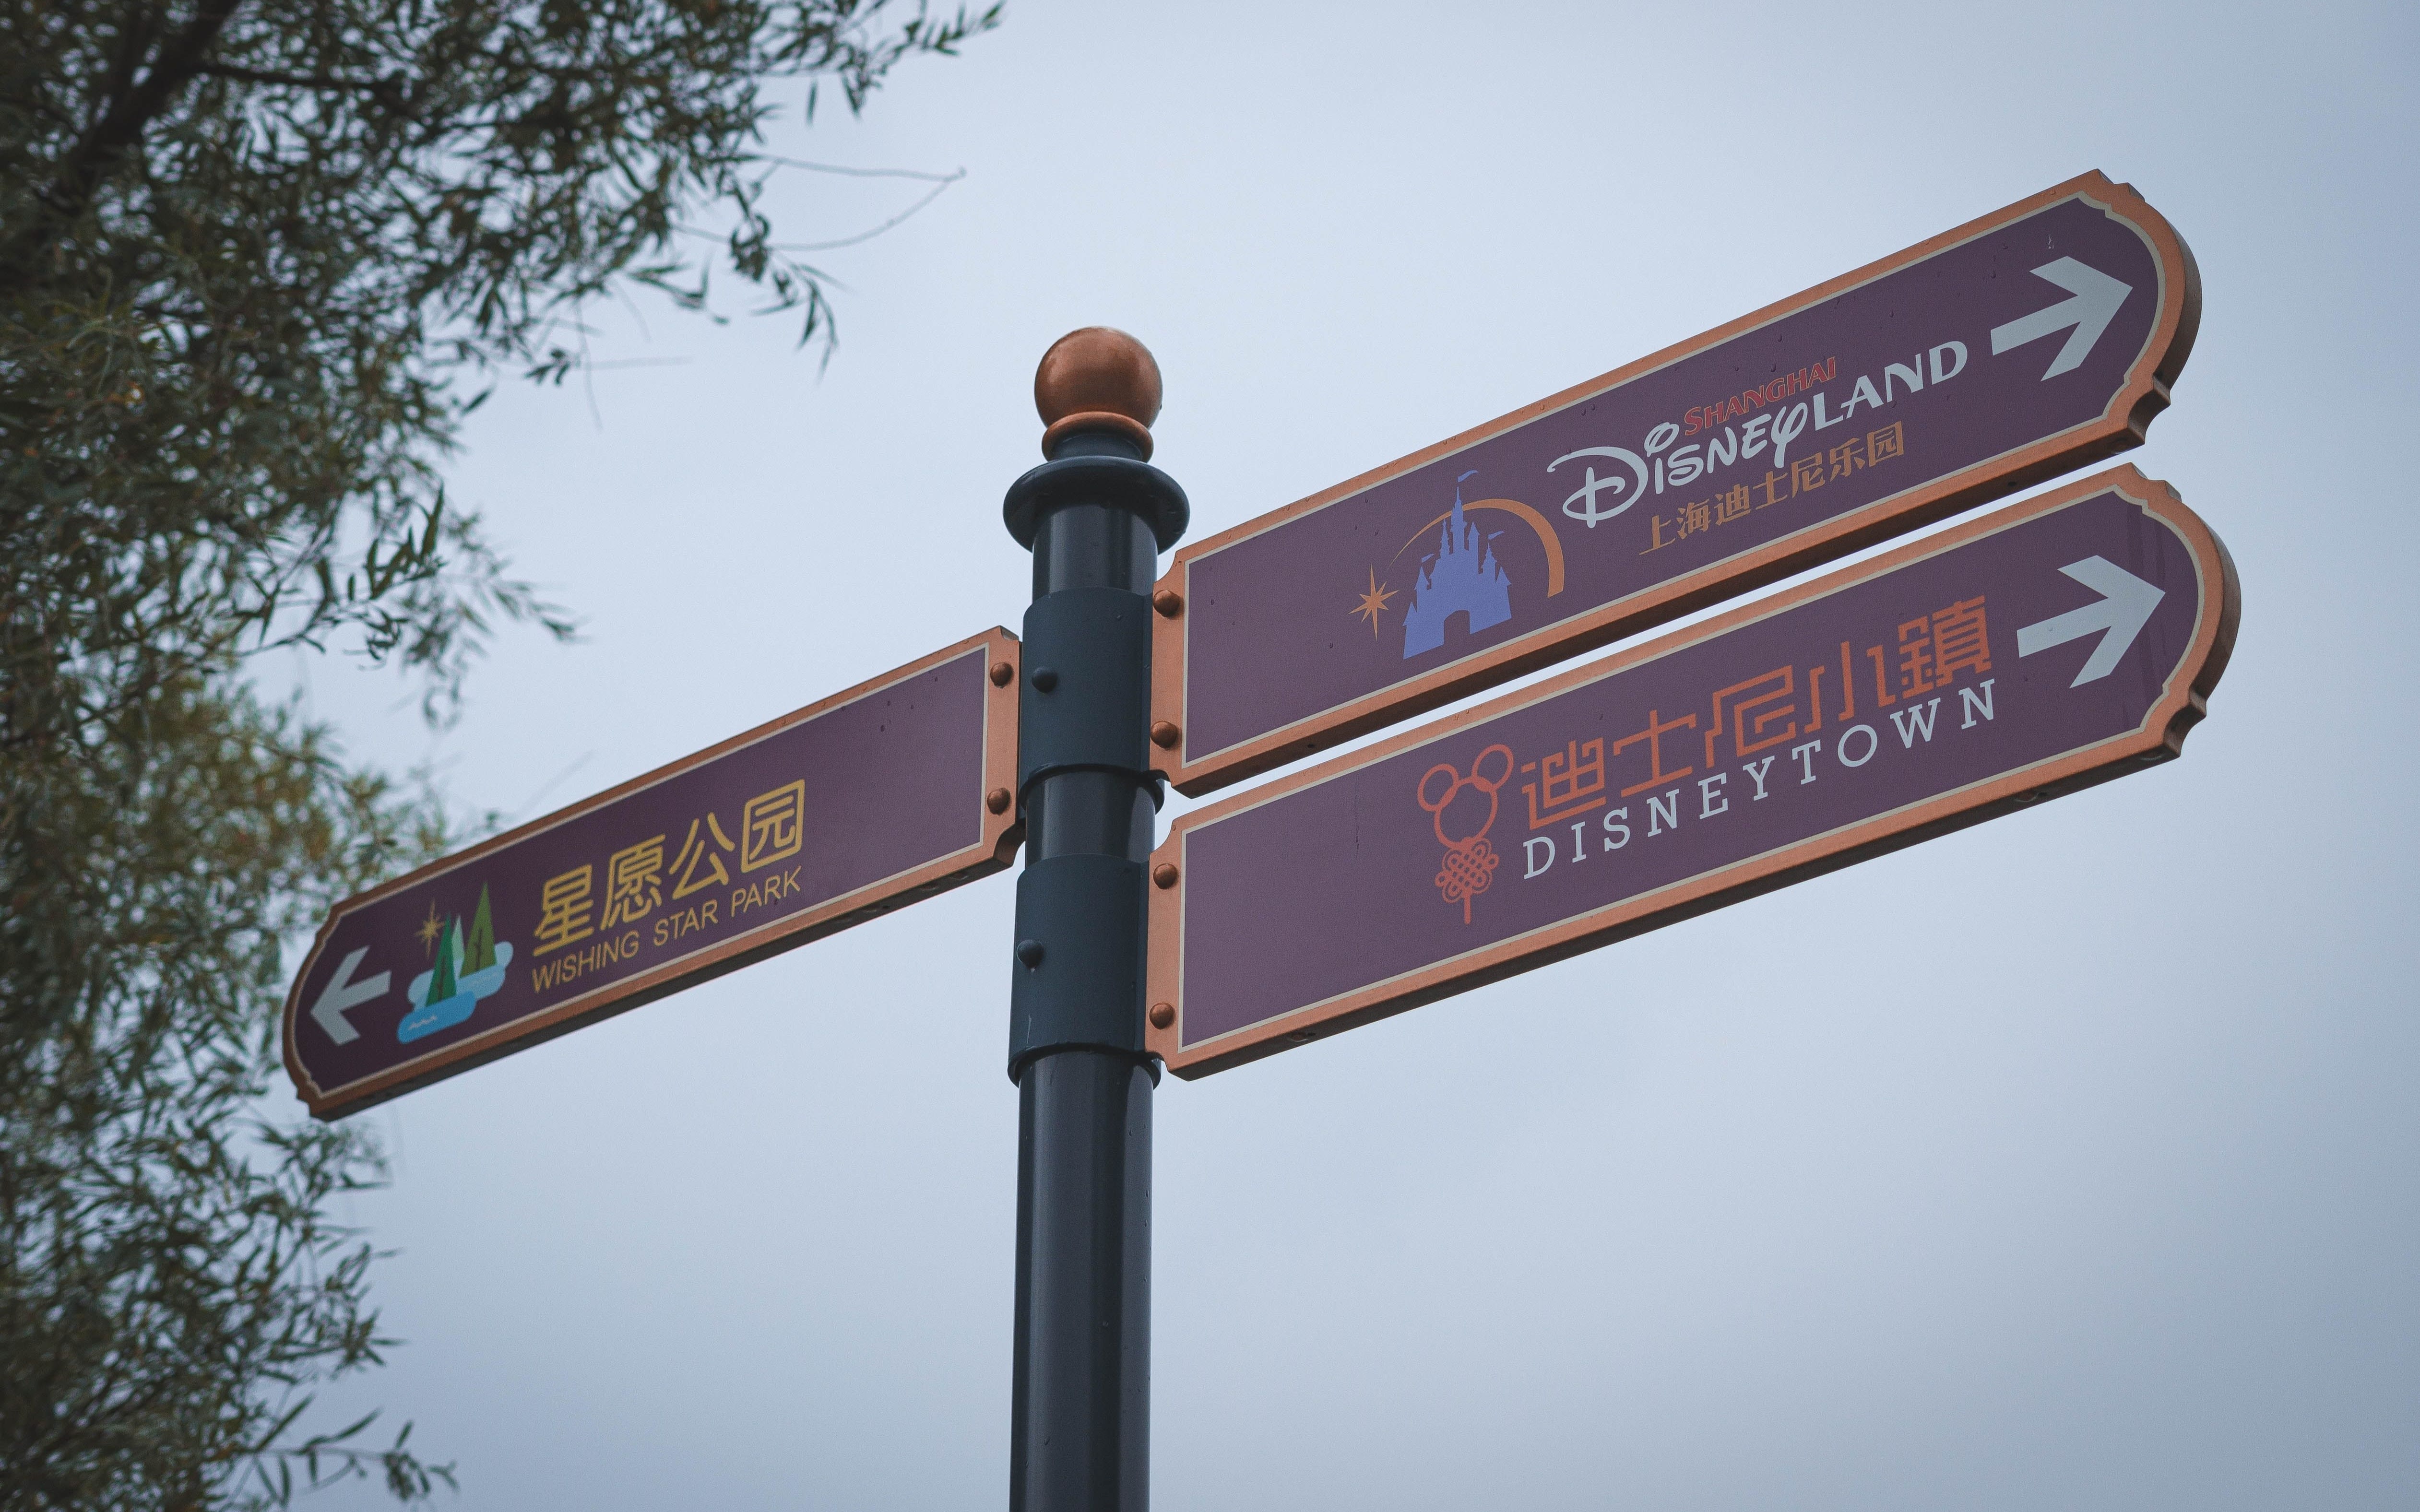 A picture of signs in Shanghai Disneyland